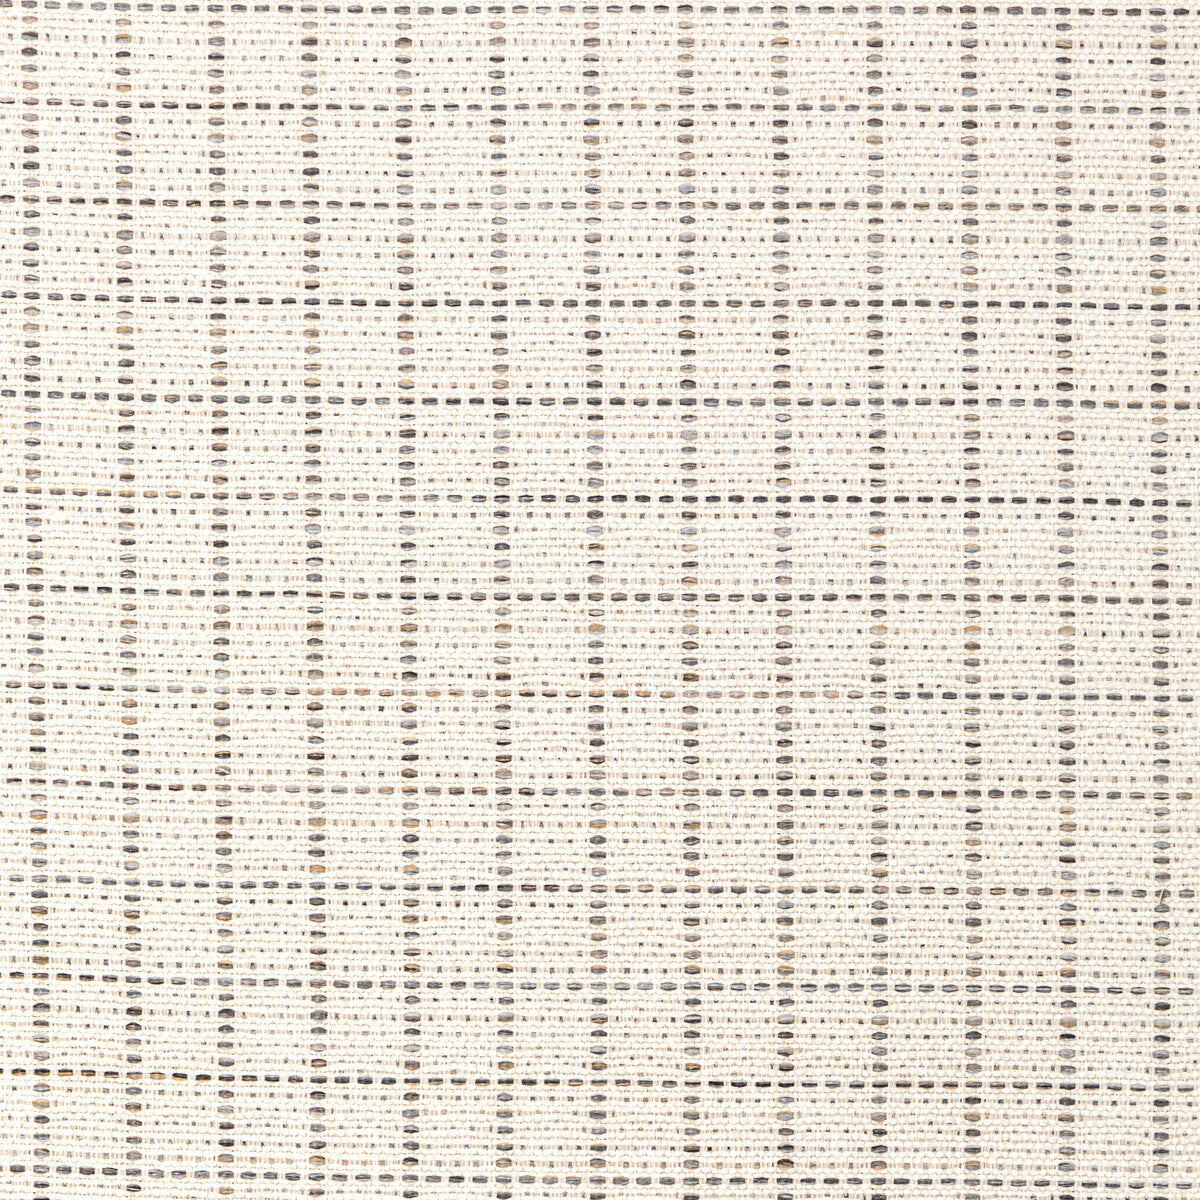 Kravet Smart fabric in 36304-11 color - pattern 36304.11.0 - by Kravet Smart in the Performance Crypton Home collection